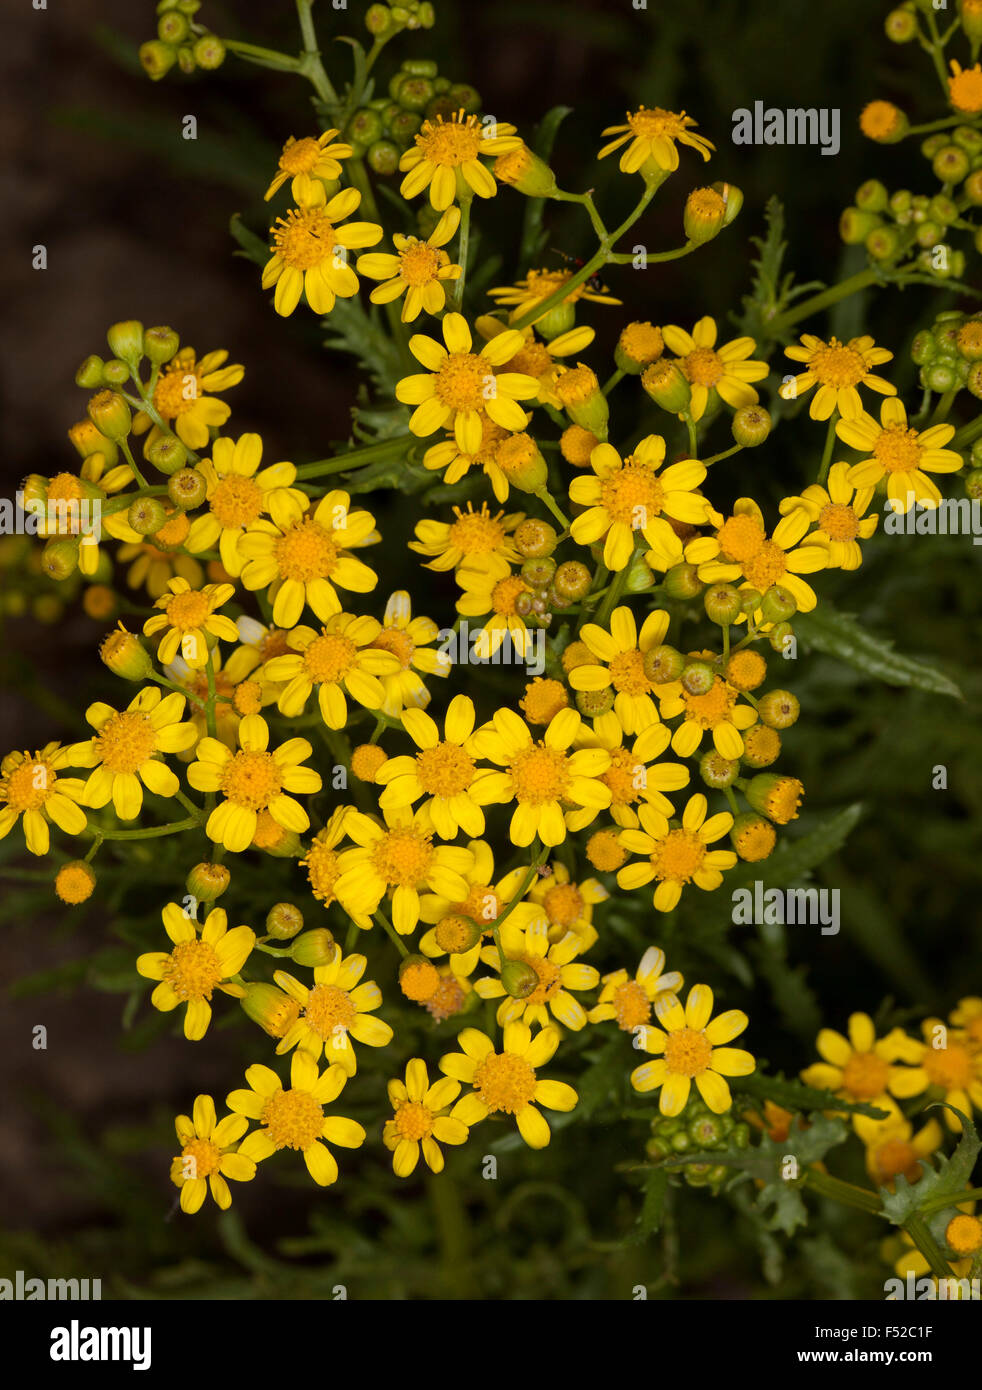 Cluster of vivid yellow flowers of Senecio magnificus, wildflowers against dark background in outback Australia Stock Photo